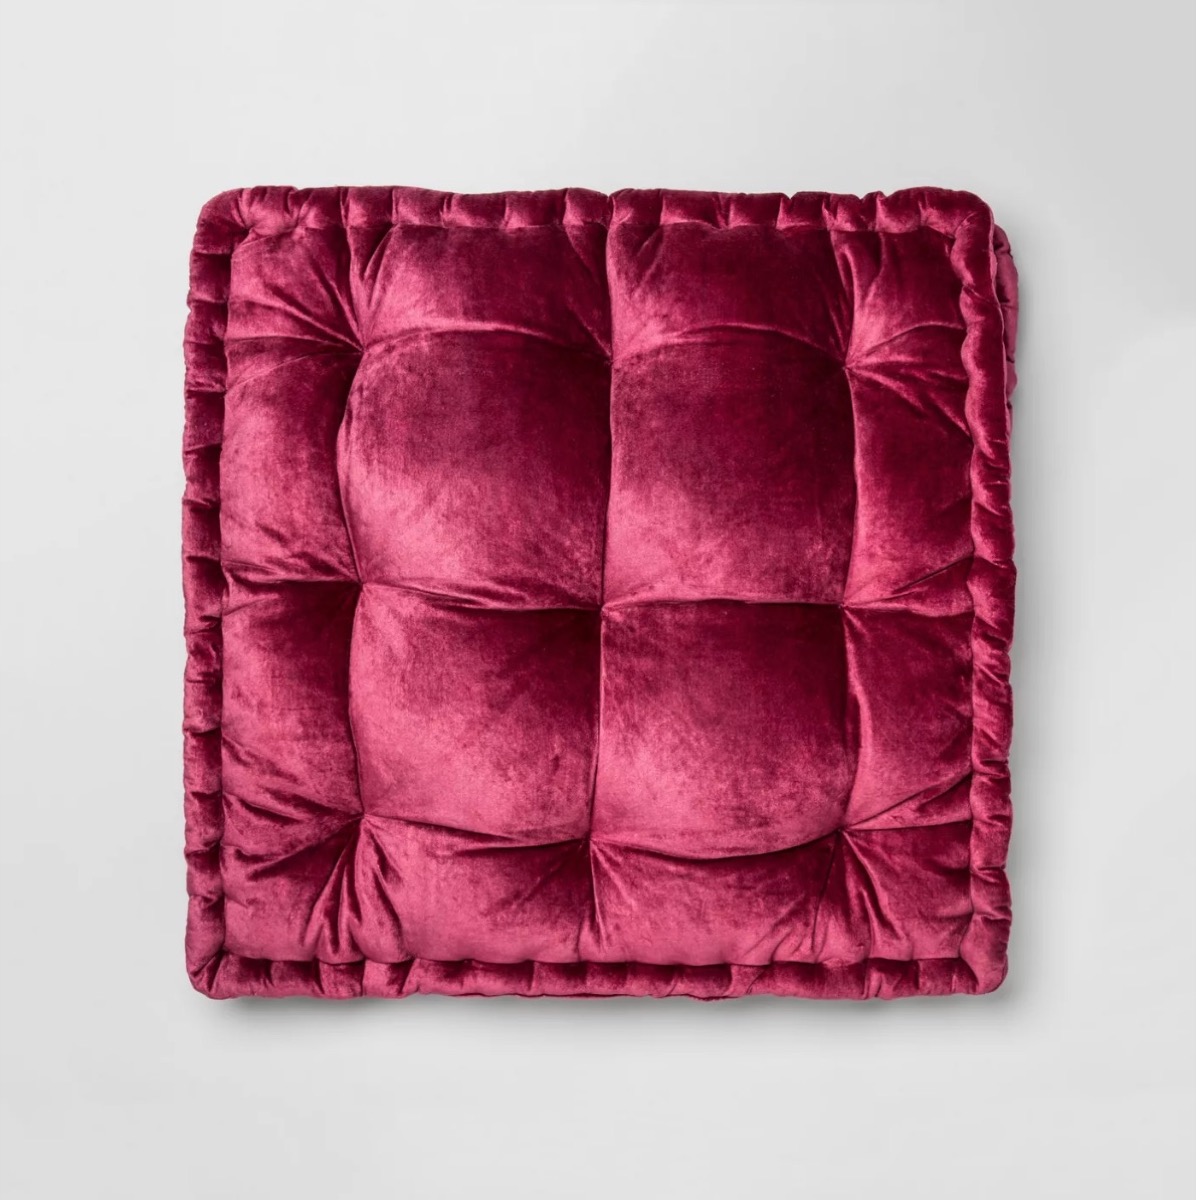 red velvet cushion, best gifts for college students